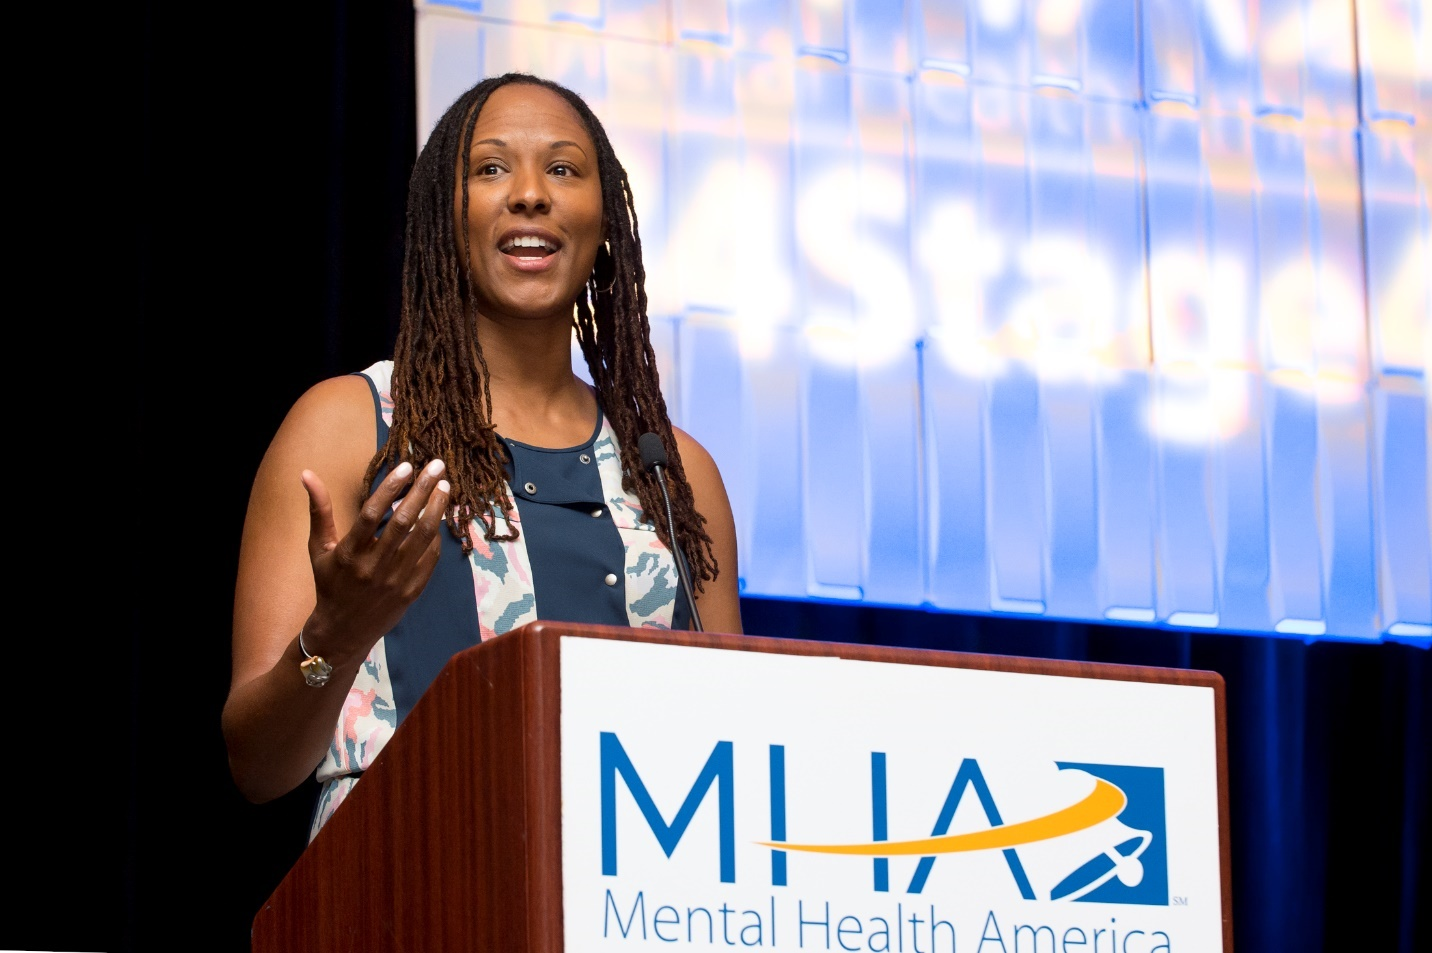 Chamique Holdsclaw speaks at an MHA podium